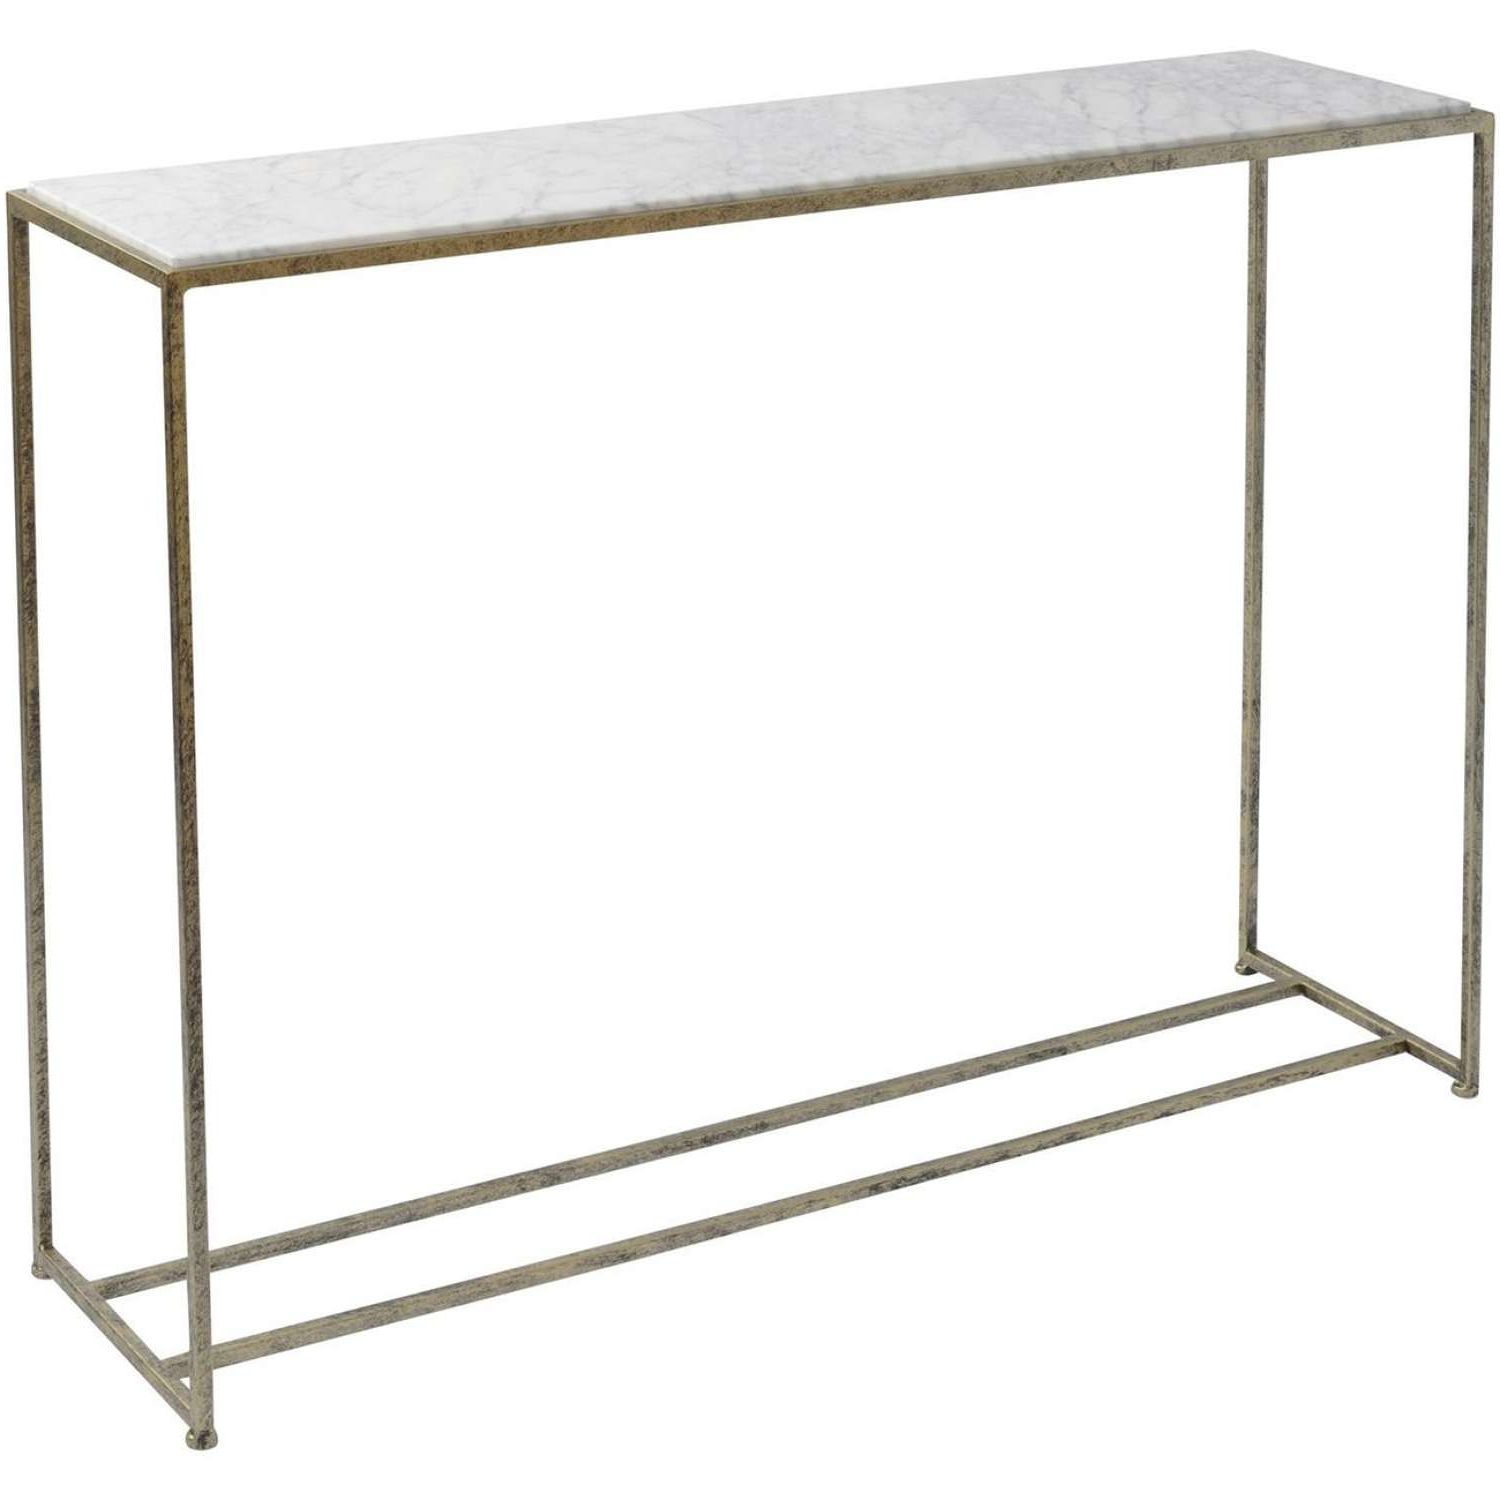 Gold Framed Console Table With White Marble Top Throughout Current White Marble Gold Metal Console Tables (View 10 of 10)